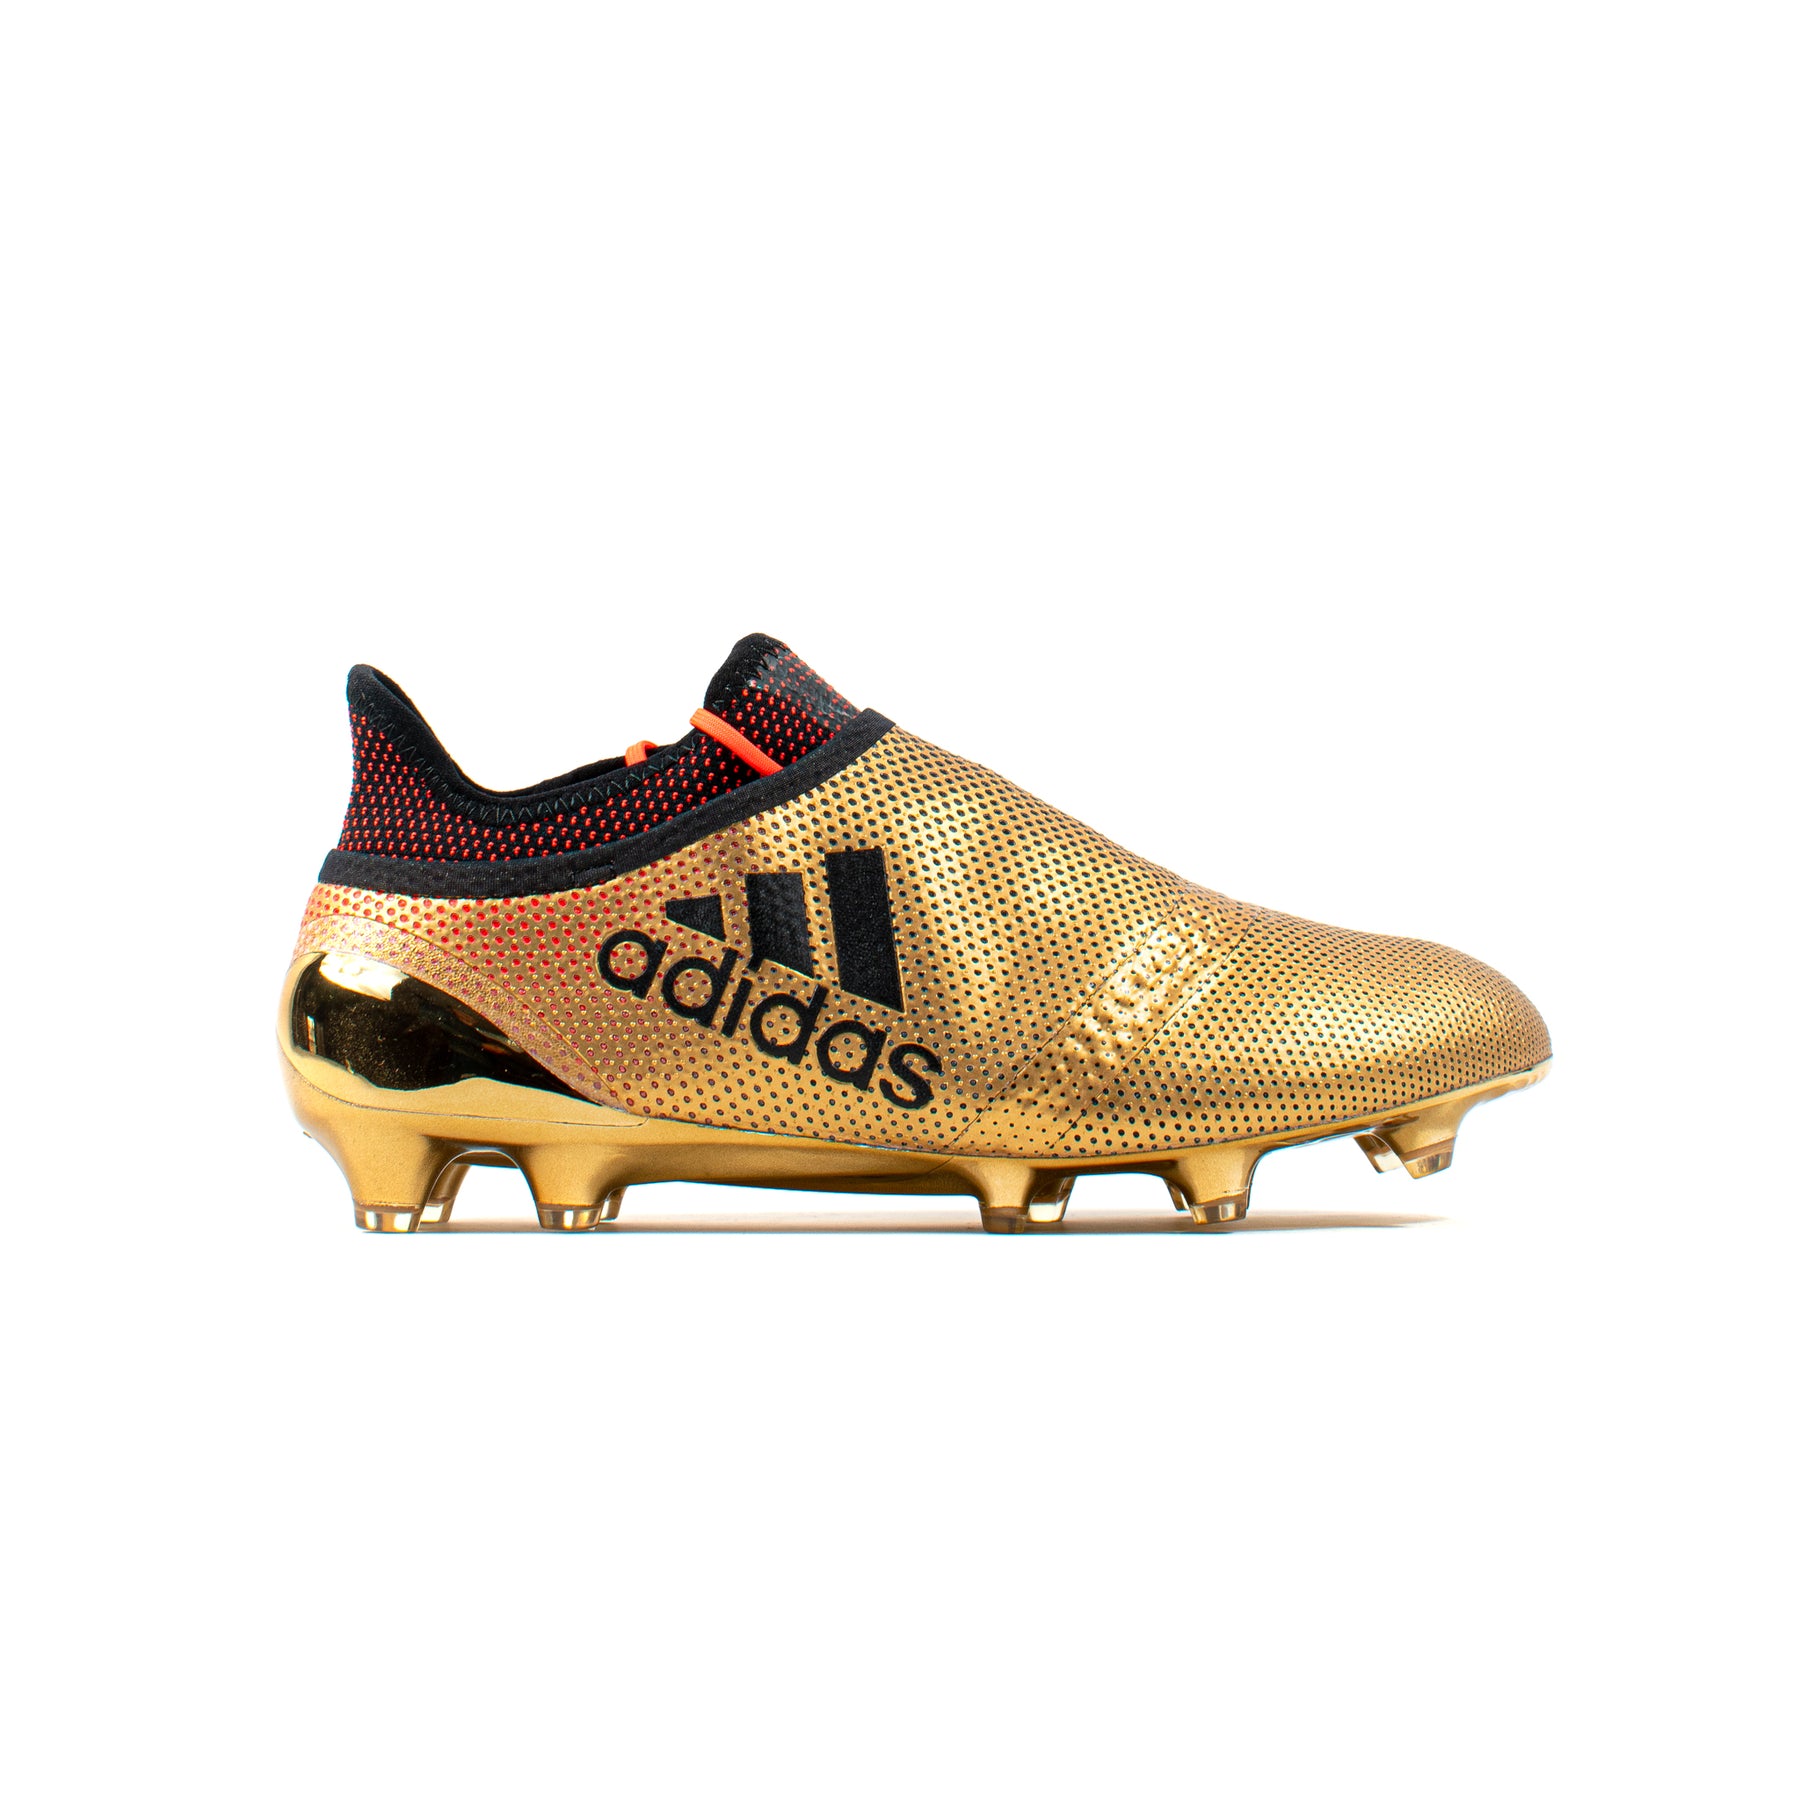 Adidas X 17+ – Classic Soccer Cleats